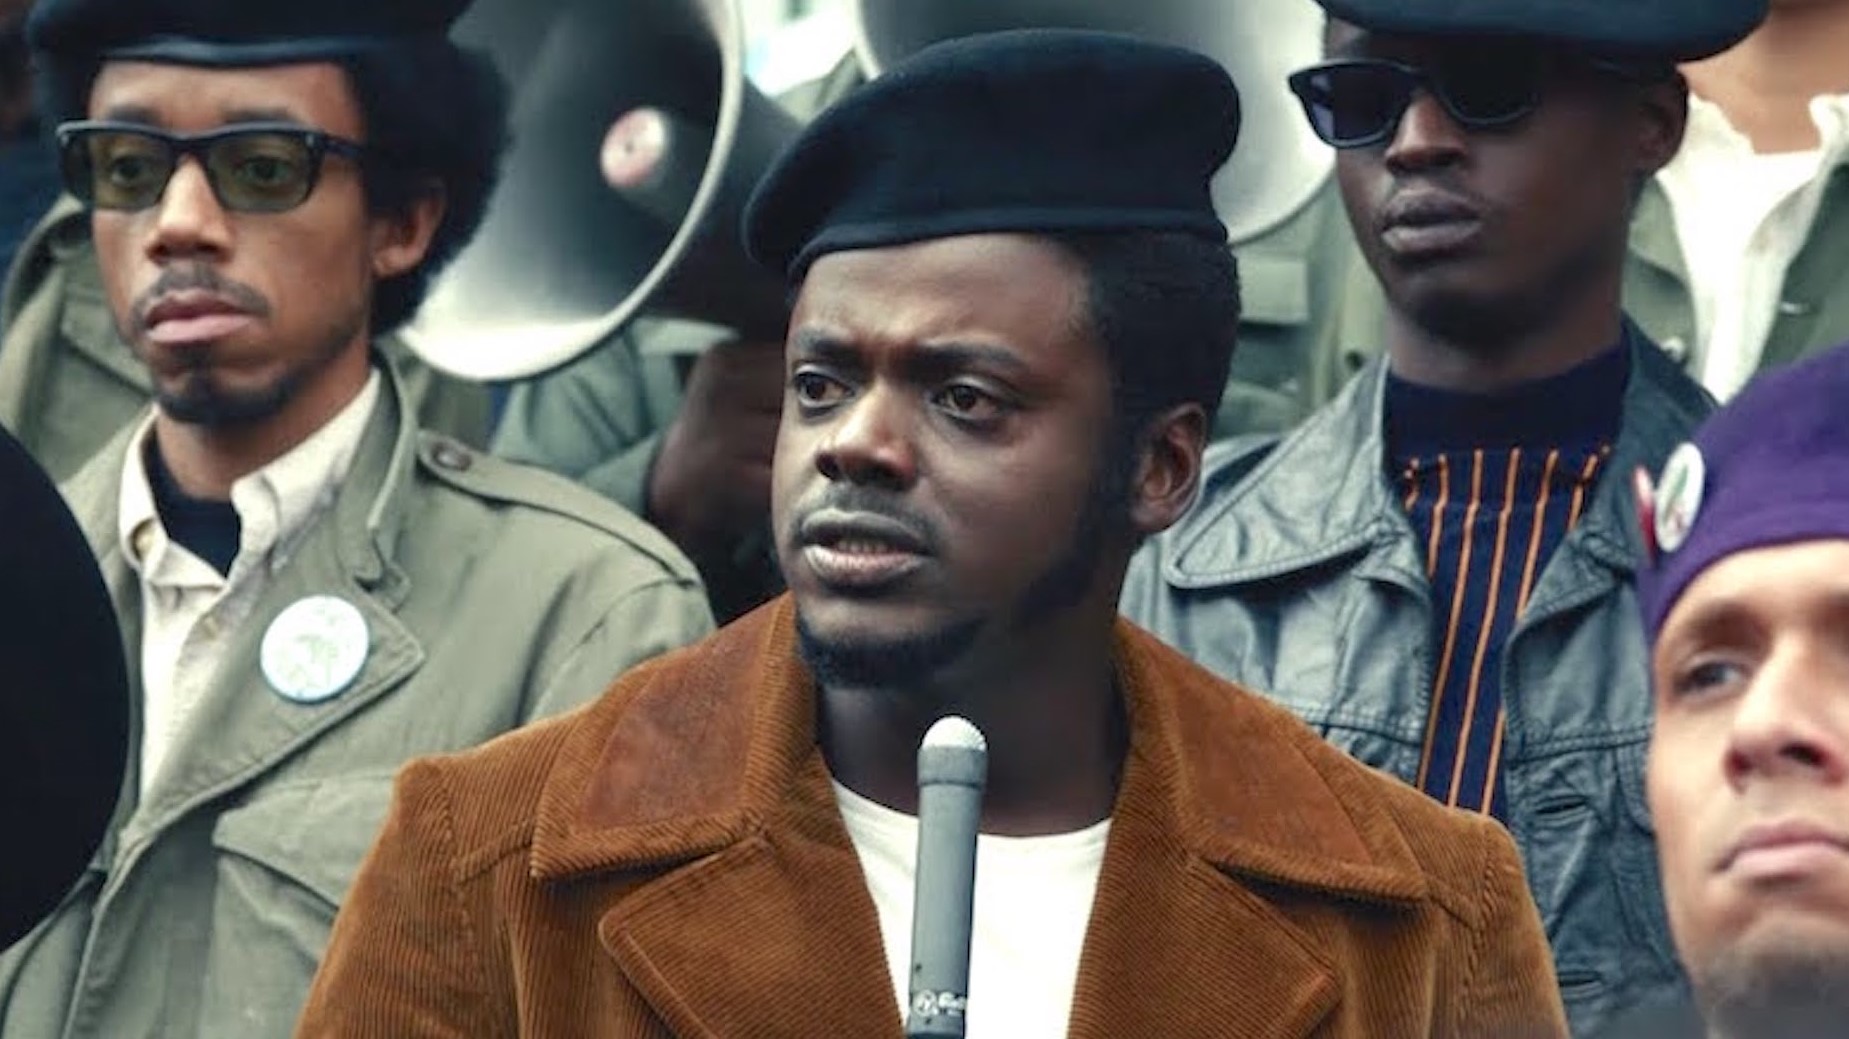 New 'Judas and the Black Messiah' trailer stars Daniel Kaluuya as Black Panther Fred ... 12, the same day it begins a 31-day streaming period on HBO Max.